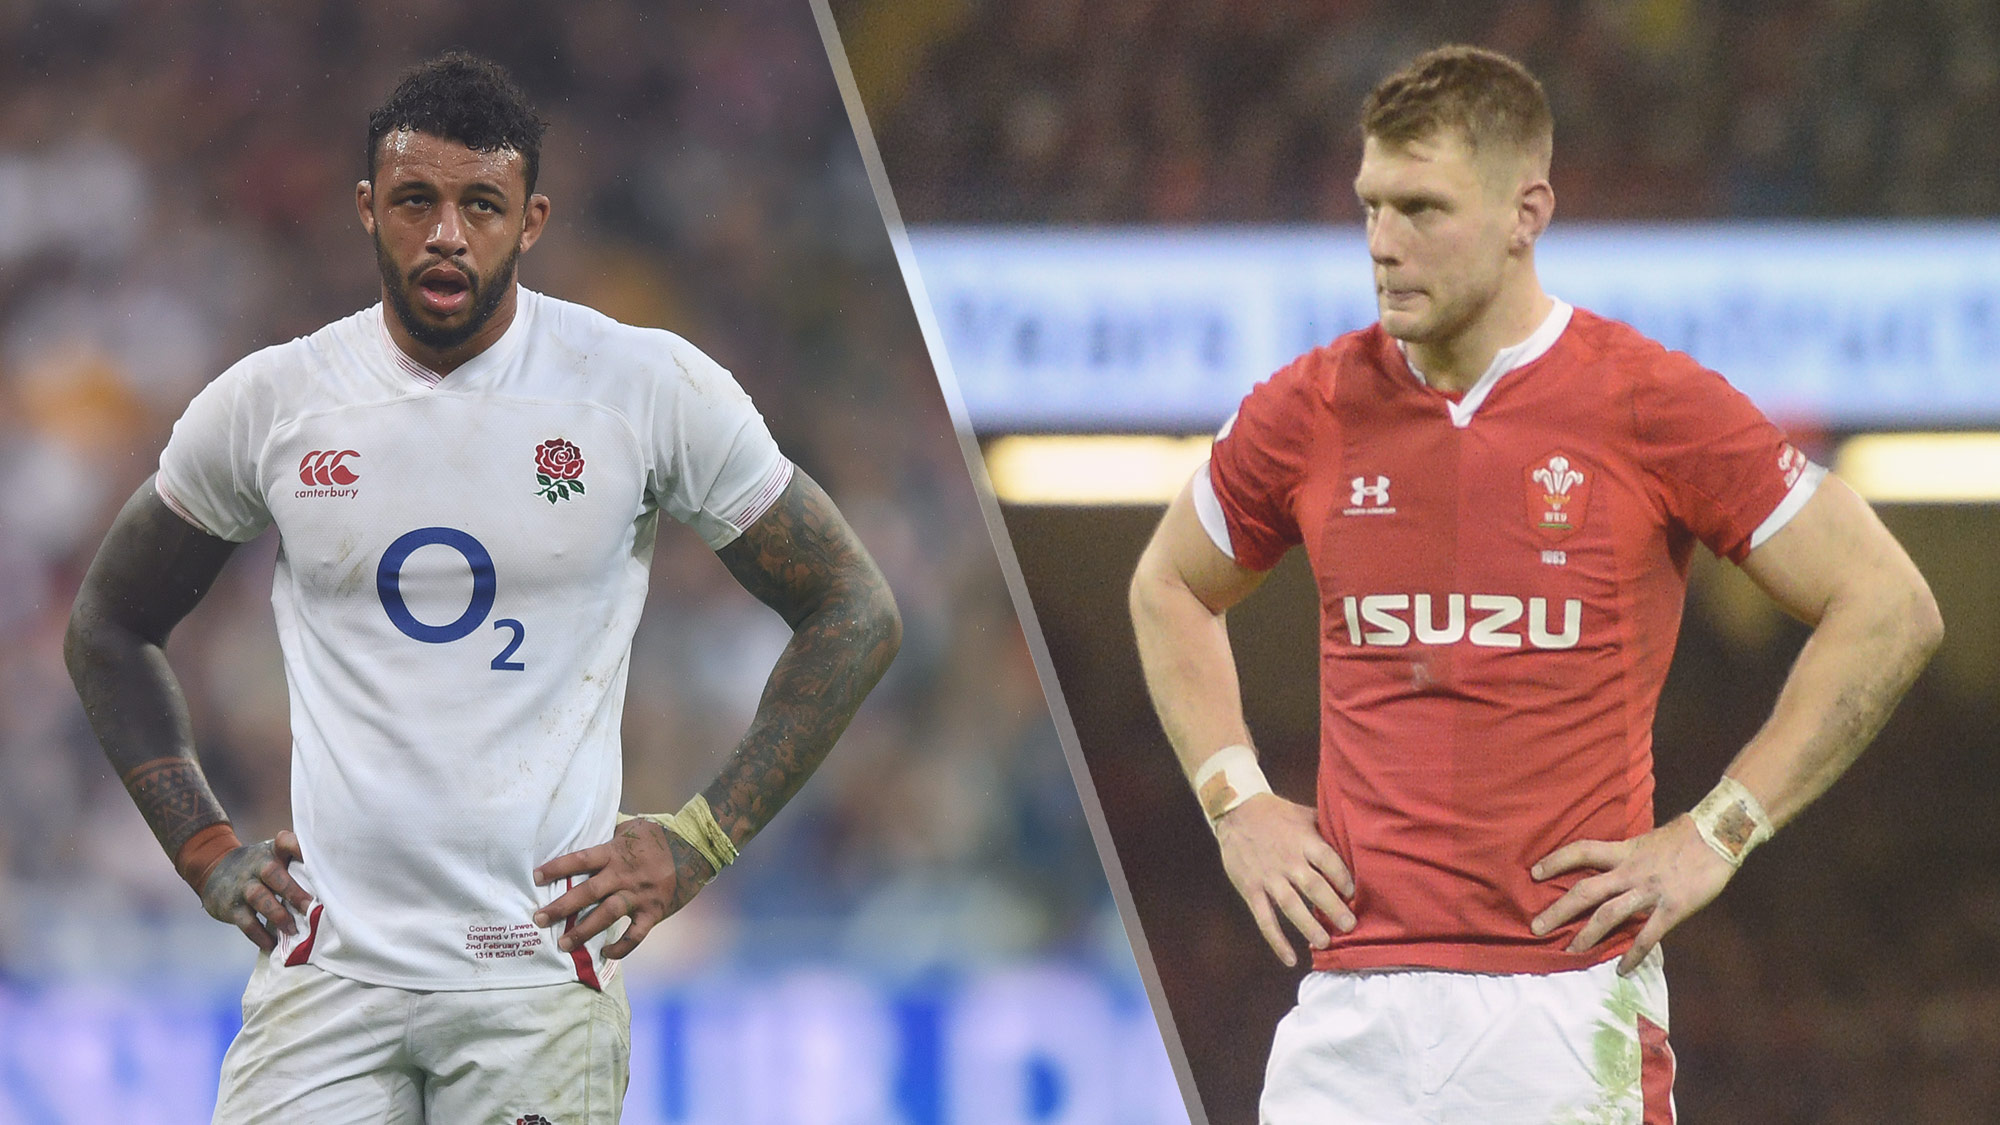 watch wales v england rugby live online free